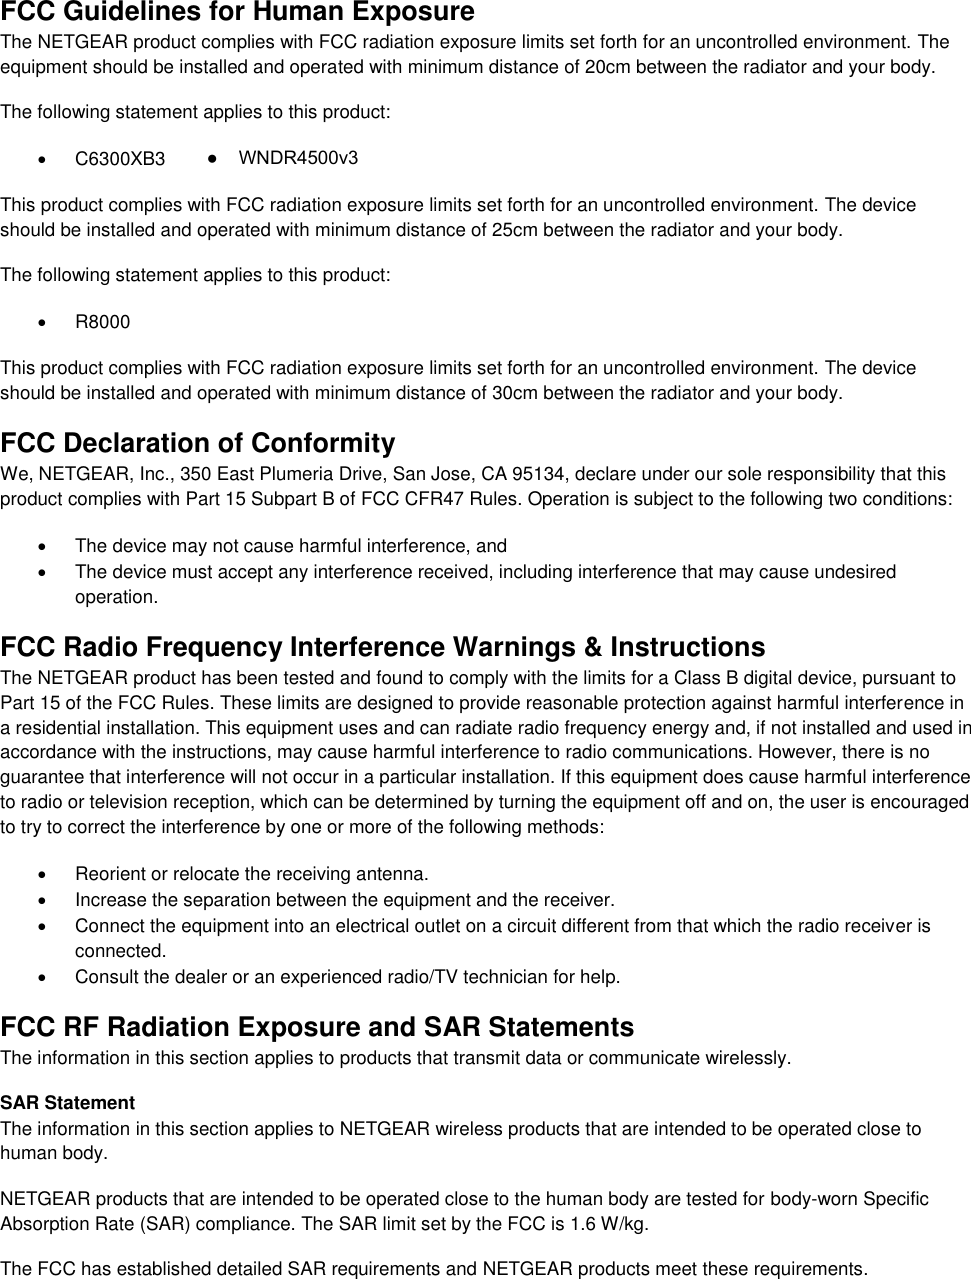  FCC Guidelines for Human Exposure The NETGEAR product complies with FCC radiation exposure limits set forth for an uncontrolled environment. The equipment should be installed and operated with minimum distance of 20cm between the radiator and your body. The following statement applies to this product:   C6300XB3 This product complies with FCC radiation exposure limits set forth for an uncontrolled environment. The device should be installed and operated with minimum distance of 25cm between the radiator and your body. The following statement applies to this product:   R8000 This product complies with FCC radiation exposure limits set forth for an uncontrolled environment. The device should be installed and operated with minimum distance of 30cm between the radiator and your body. FCC Declaration of Conformity We, NETGEAR, Inc., 350 East Plumeria Drive, San Jose, CA 95134, declare under our sole responsibility that this product complies with Part 15 Subpart B of FCC CFR47 Rules. Operation is subject to the following two conditions:   The device may not cause harmful interference, and   The device must accept any interference received, including interference that may cause undesired operation. FCC Radio Frequency Interference Warnings &amp; Instructions The NETGEAR product has been tested and found to comply with the limits for a Class B digital device, pursuant to Part 15 of the FCC Rules. These limits are designed to provide reasonable protection against harmful interference in a residential installation. This equipment uses and can radiate radio frequency energy and, if not installed and used in accordance with the instructions, may cause harmful interference to radio communications. However, there is no guarantee that interference will not occur in a particular installation. If this equipment does cause harmful interference to radio or television reception, which can be determined by turning the equipment off and on, the user is encouraged to try to correct the interference by one or more of the following methods:   Reorient or relocate the receiving antenna.   Increase the separation between the equipment and the receiver.   Connect the equipment into an electrical outlet on a circuit different from that which the radio receiver is connected.   Consult the dealer or an experienced radio/TV technician for help. FCC RF Radiation Exposure and SAR Statements The information in this section applies to products that transmit data or communicate wirelessly. SAR Statement The information in this section applies to NETGEAR wireless products that are intended to be operated close to human body.  NETGEAR products that are intended to be operated close to the human body are tested for body-worn Specific Absorption Rate (SAR) compliance. The SAR limit set by the FCC is 1.6 W/kg. The FCC has established detailed SAR requirements and NETGEAR products meet these requirements. ●    WNDR4500v3